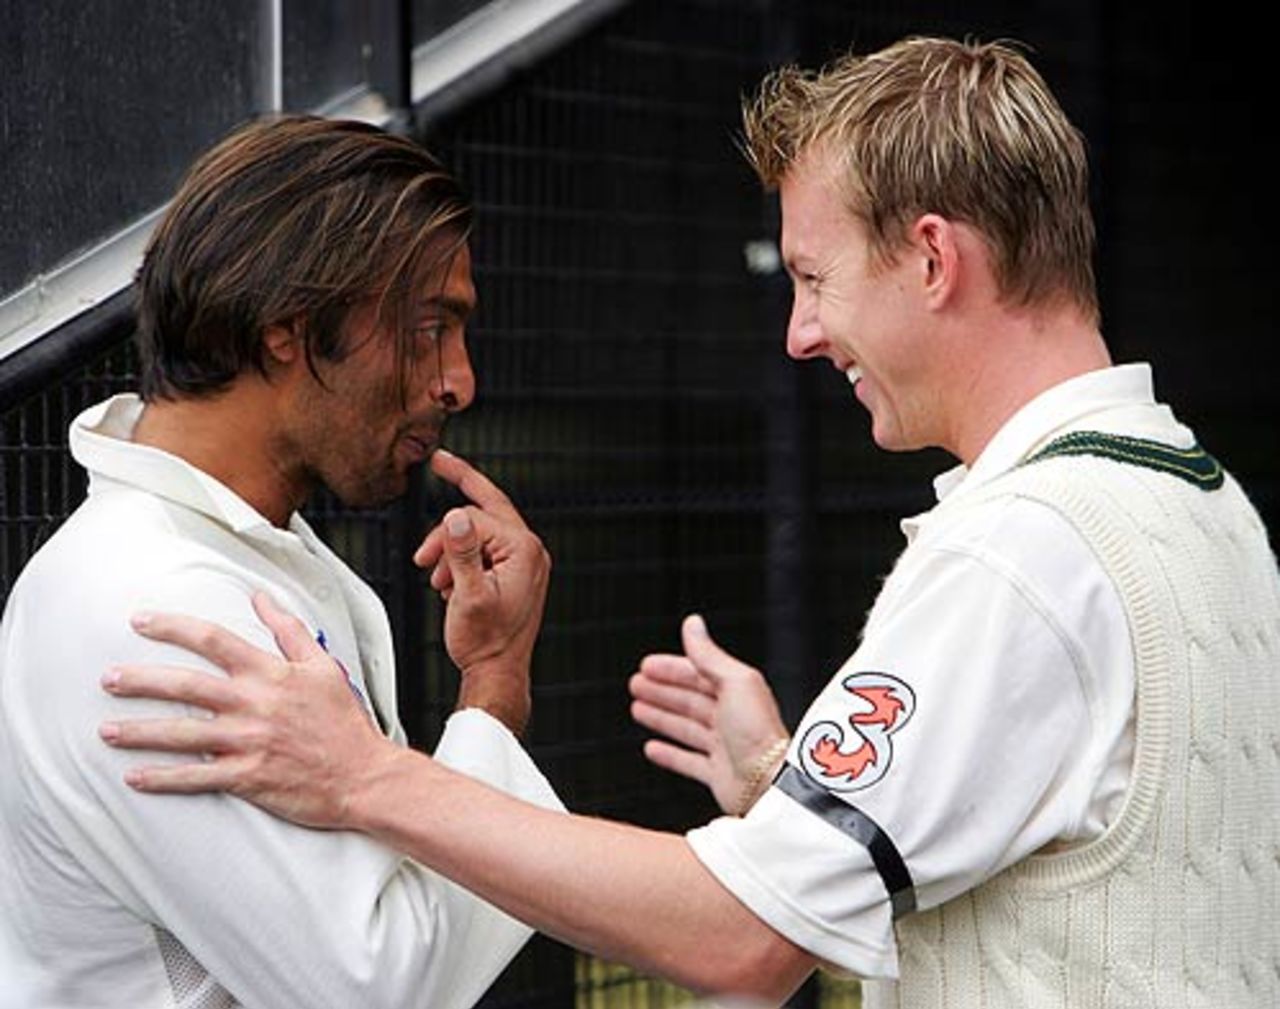 Shoaib Akhtar and Brett Lee chat during the rain delay on the third day, Australia v Pakistan, 2nd Test,  Melbourne, December 27, 2004